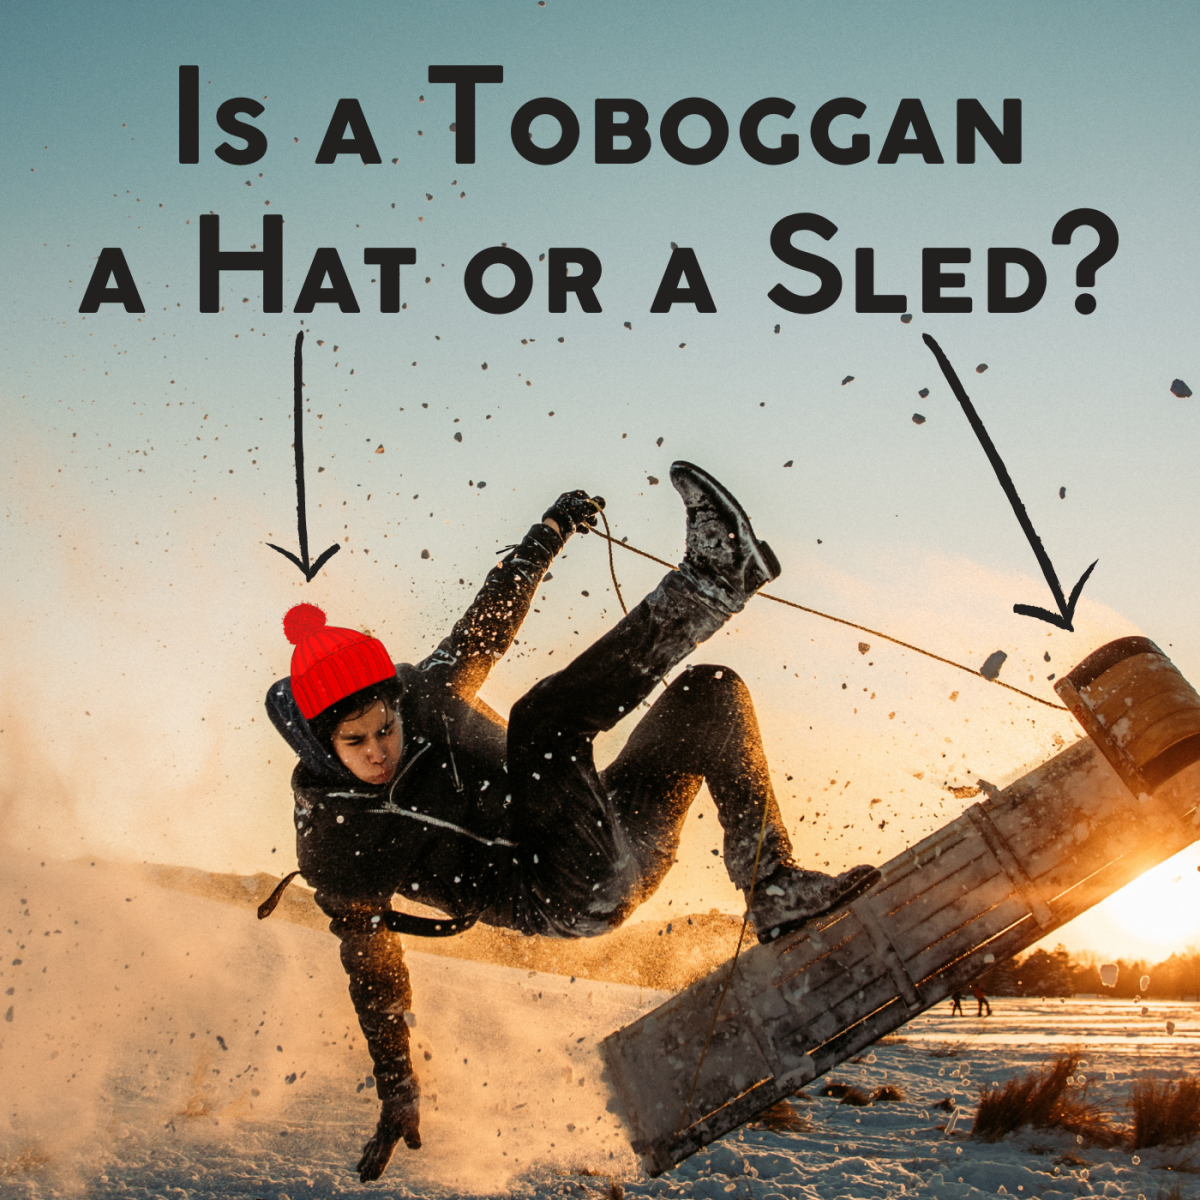 So, what is a toboggan? It depends on where you live!